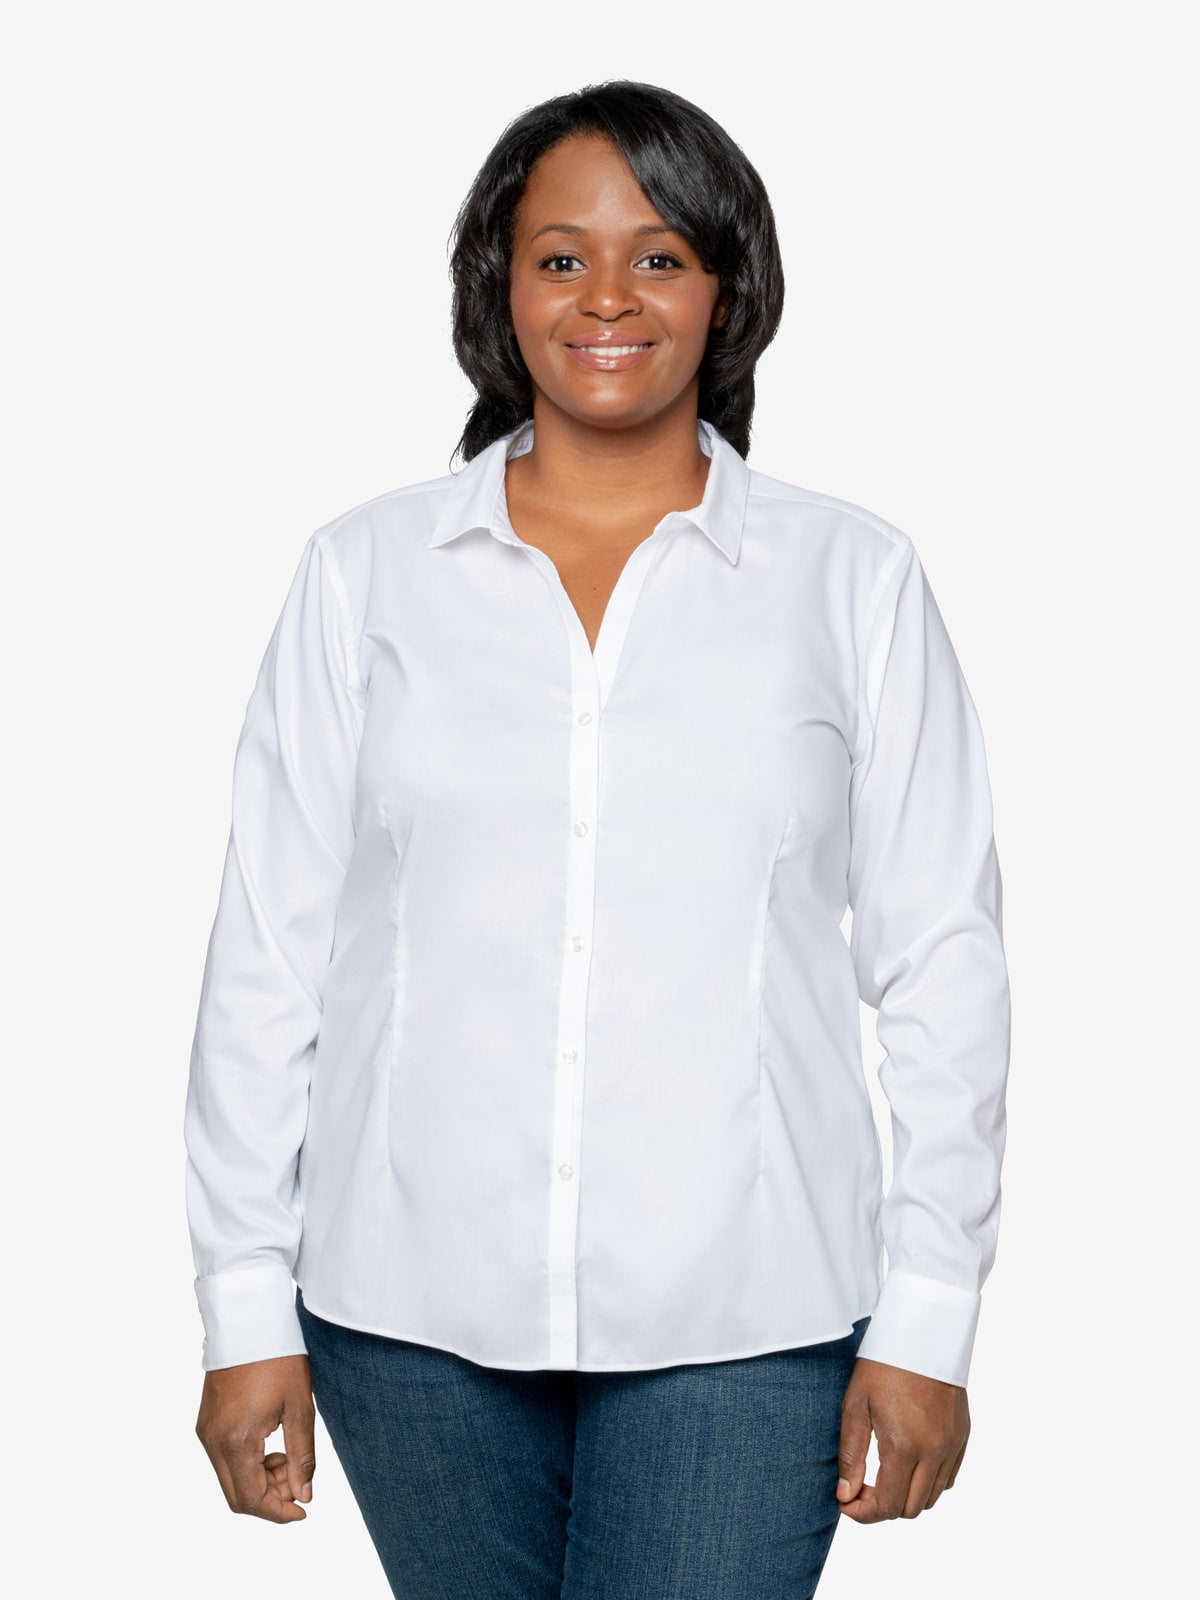 Insect Shield Women's Wrinkle-Resistant Oxford Shirt